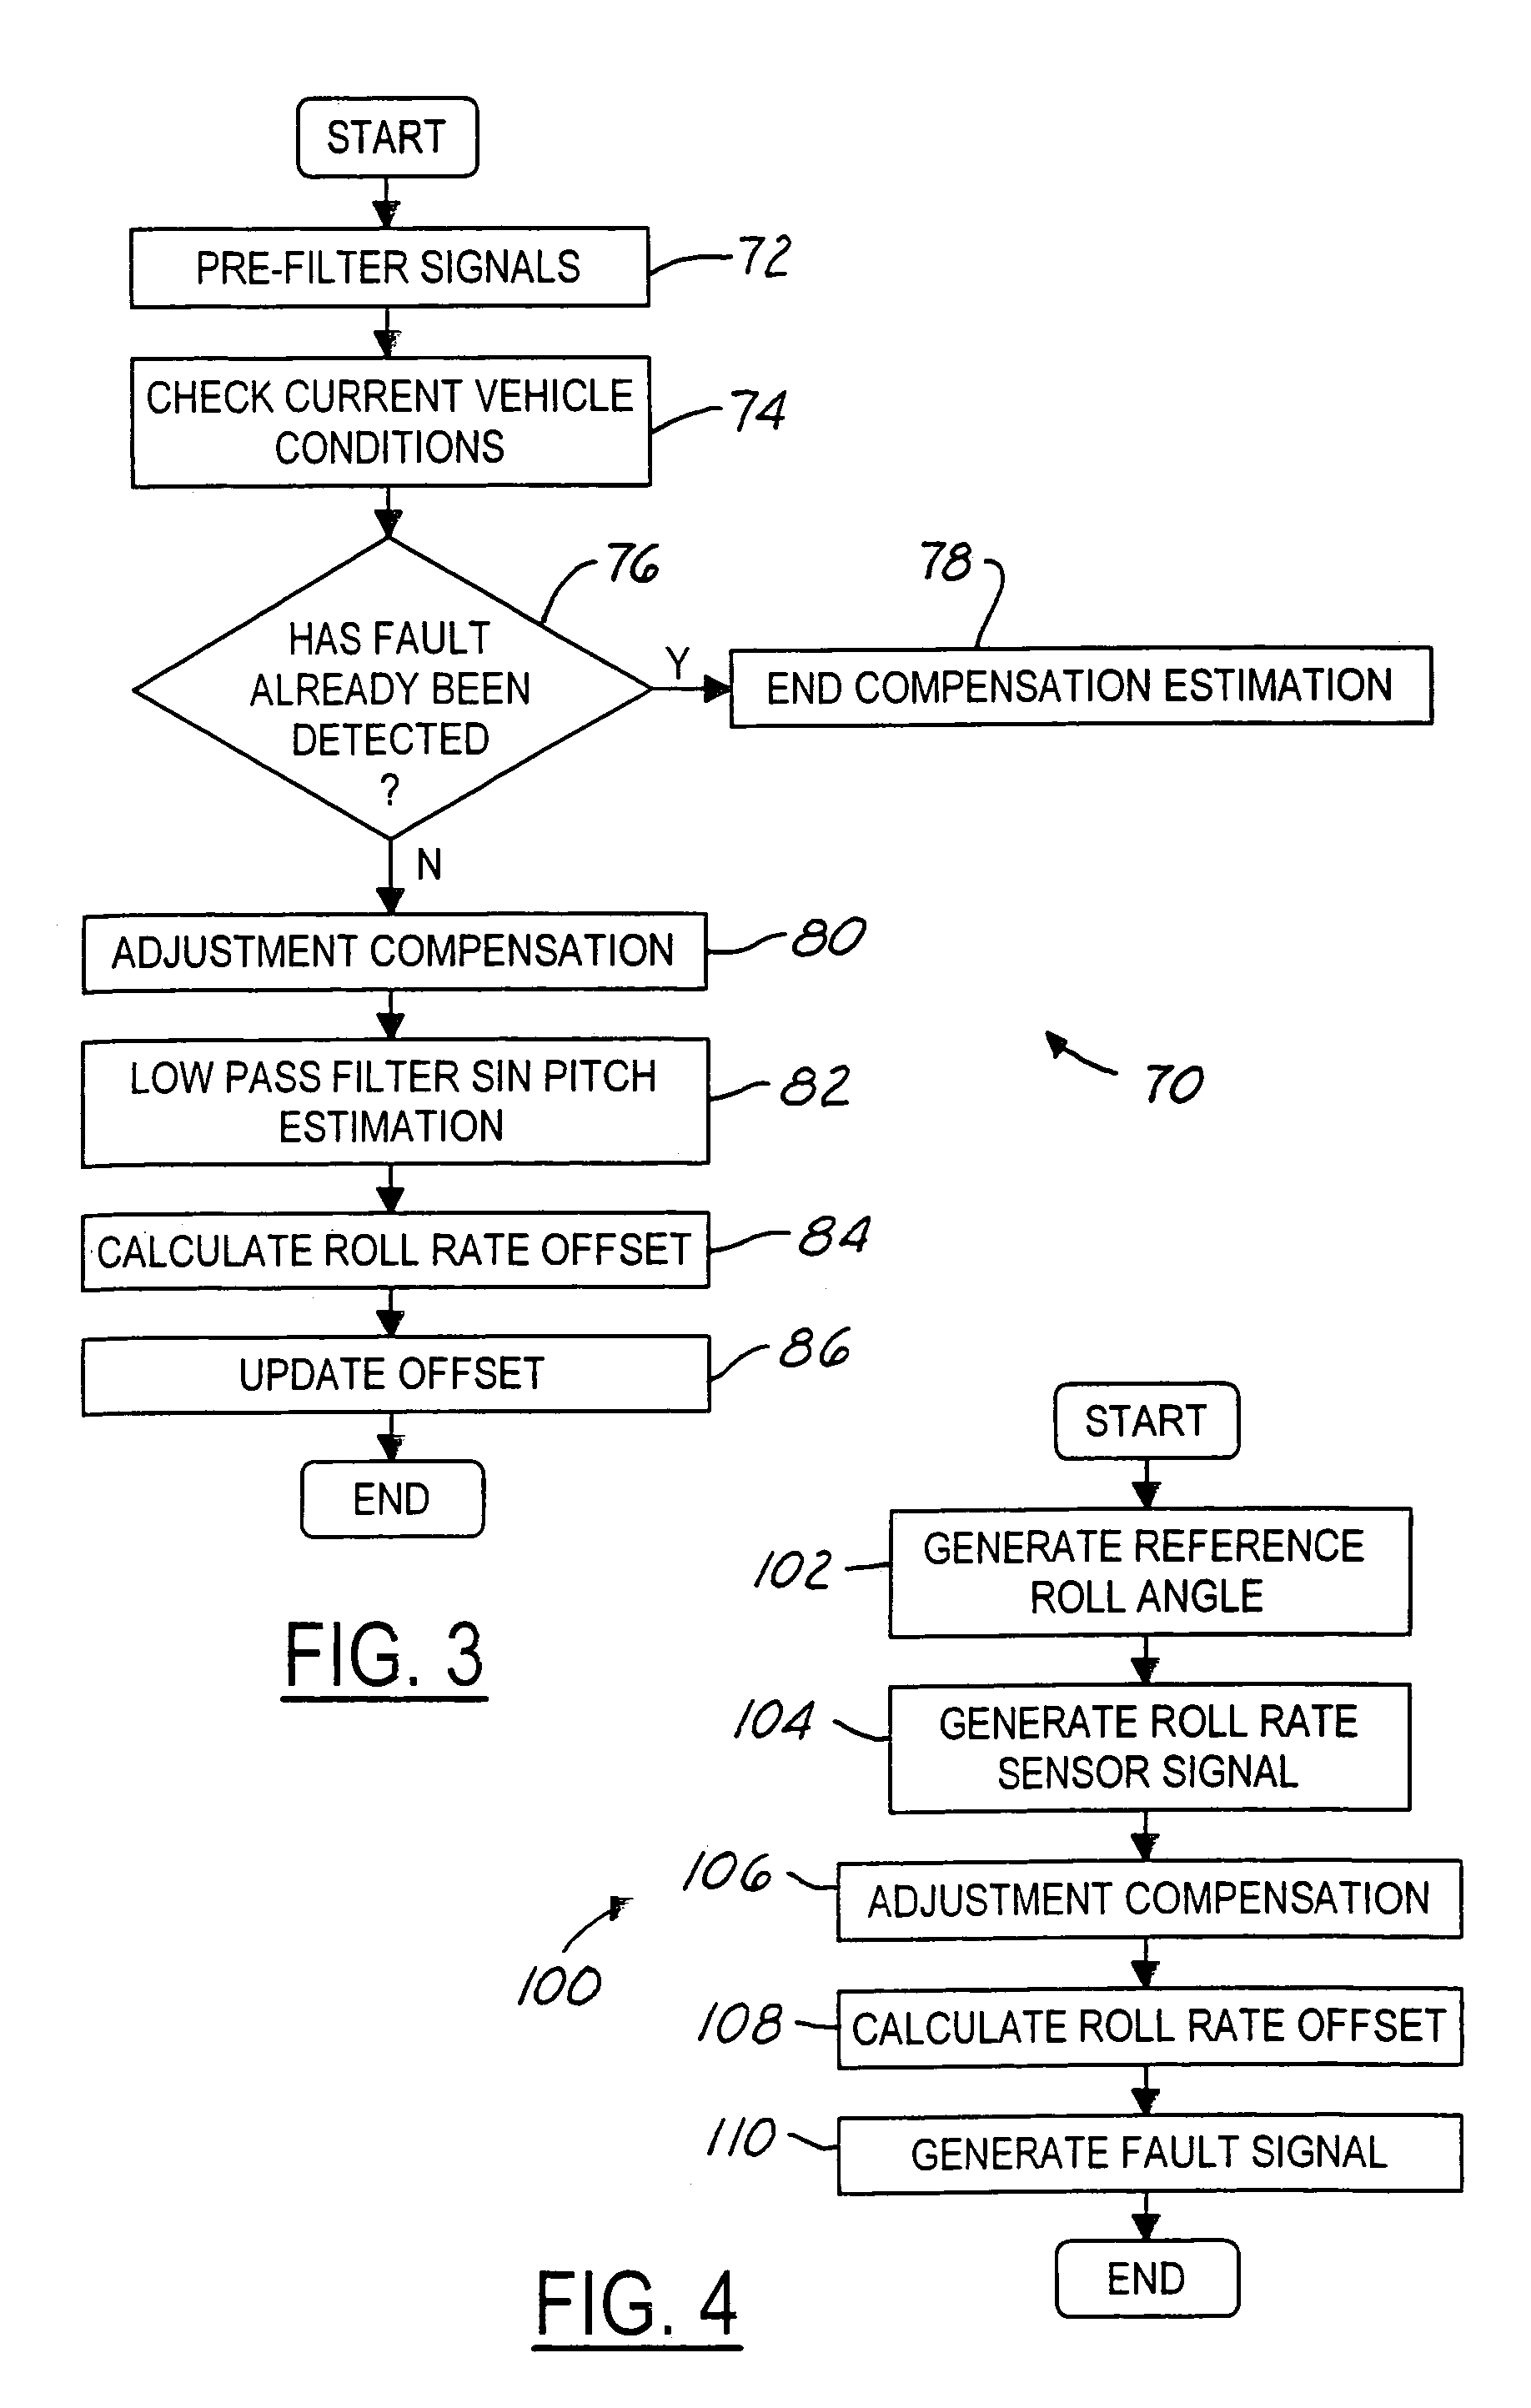 System and method for detecting roll rate sensor fault